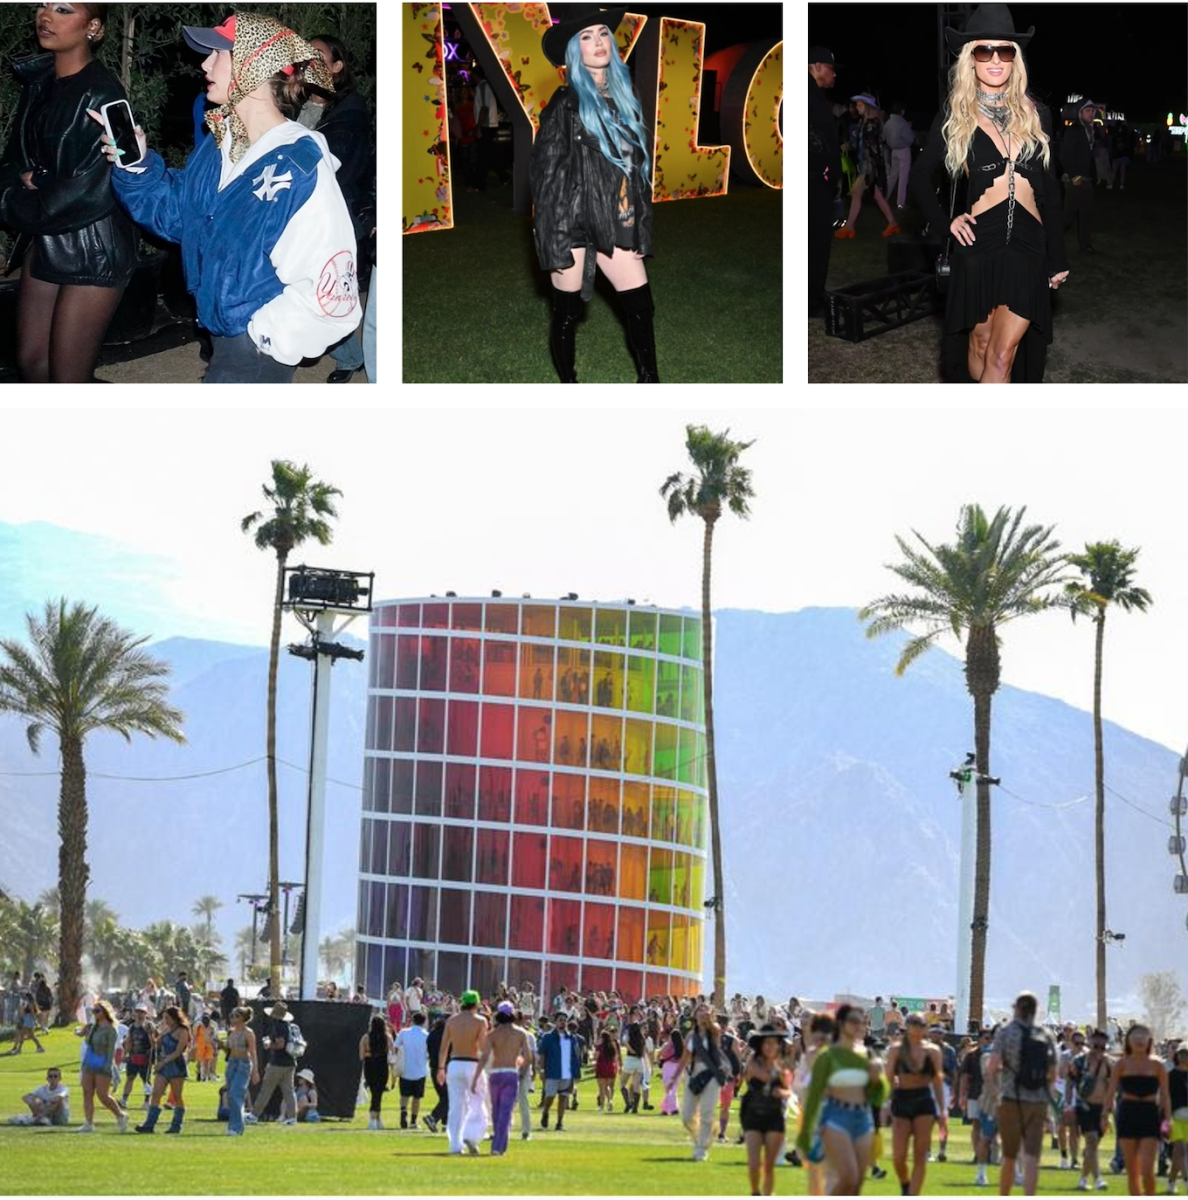 Coachella+and+some+outfits+worn+placed+above